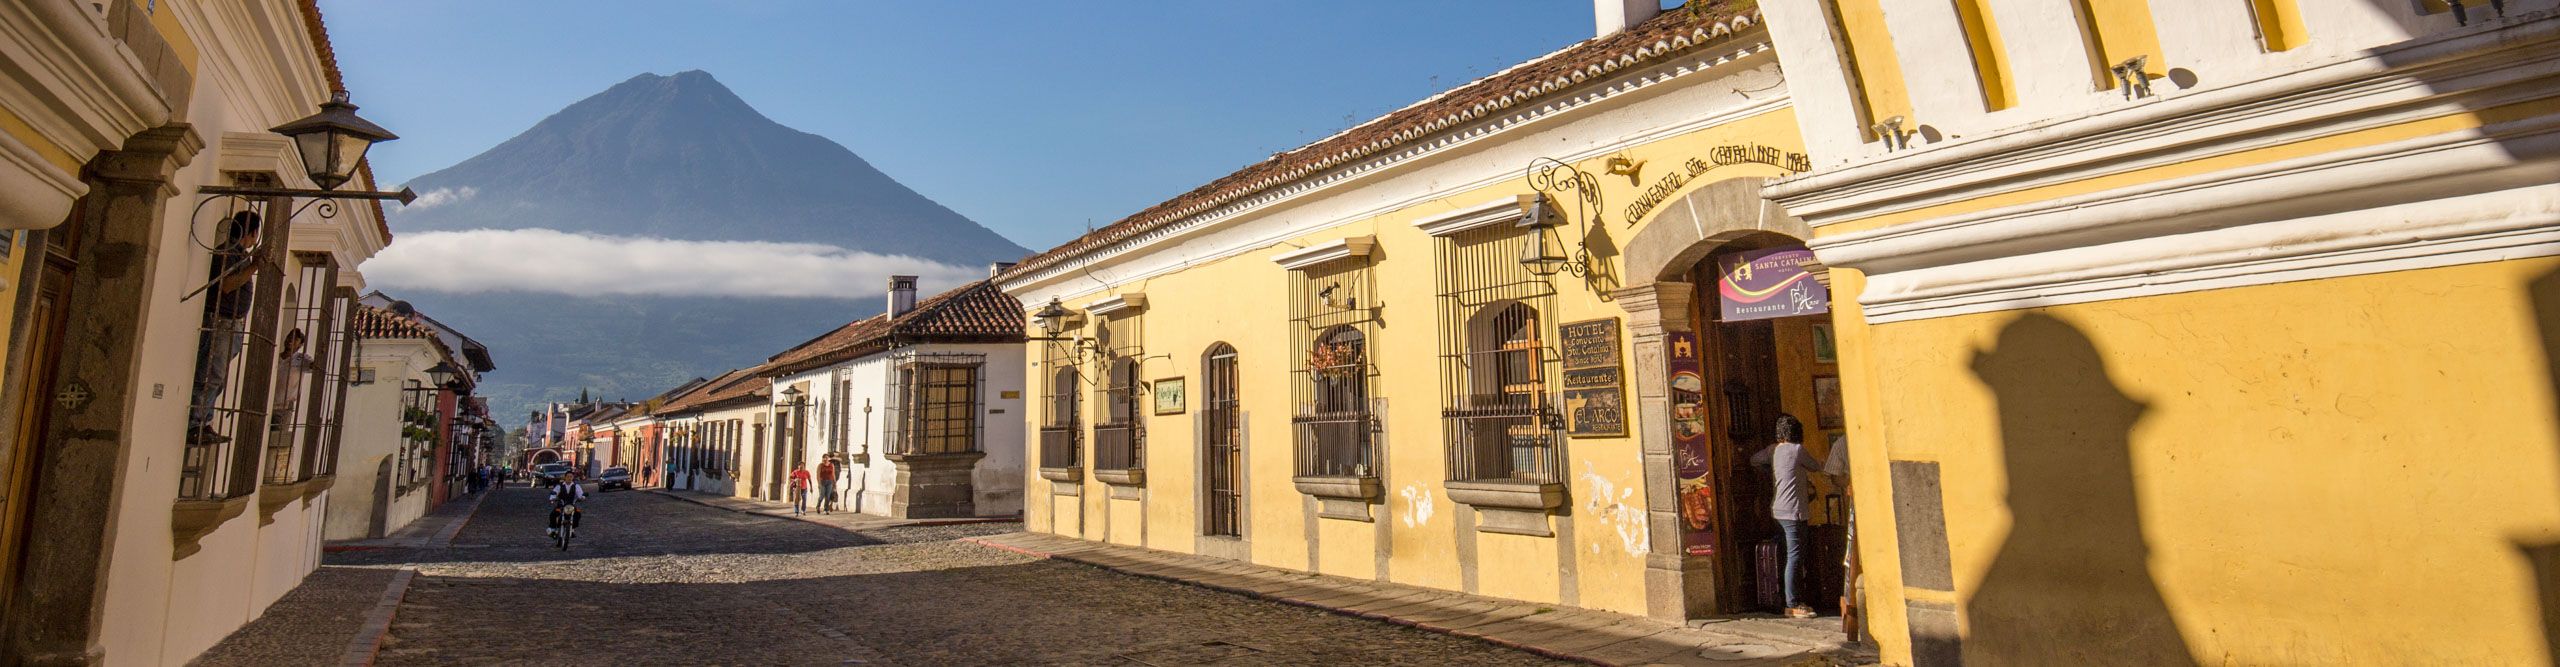 Street in Antigua with mountains in the distance in the late afternoon sun, Guatemala 